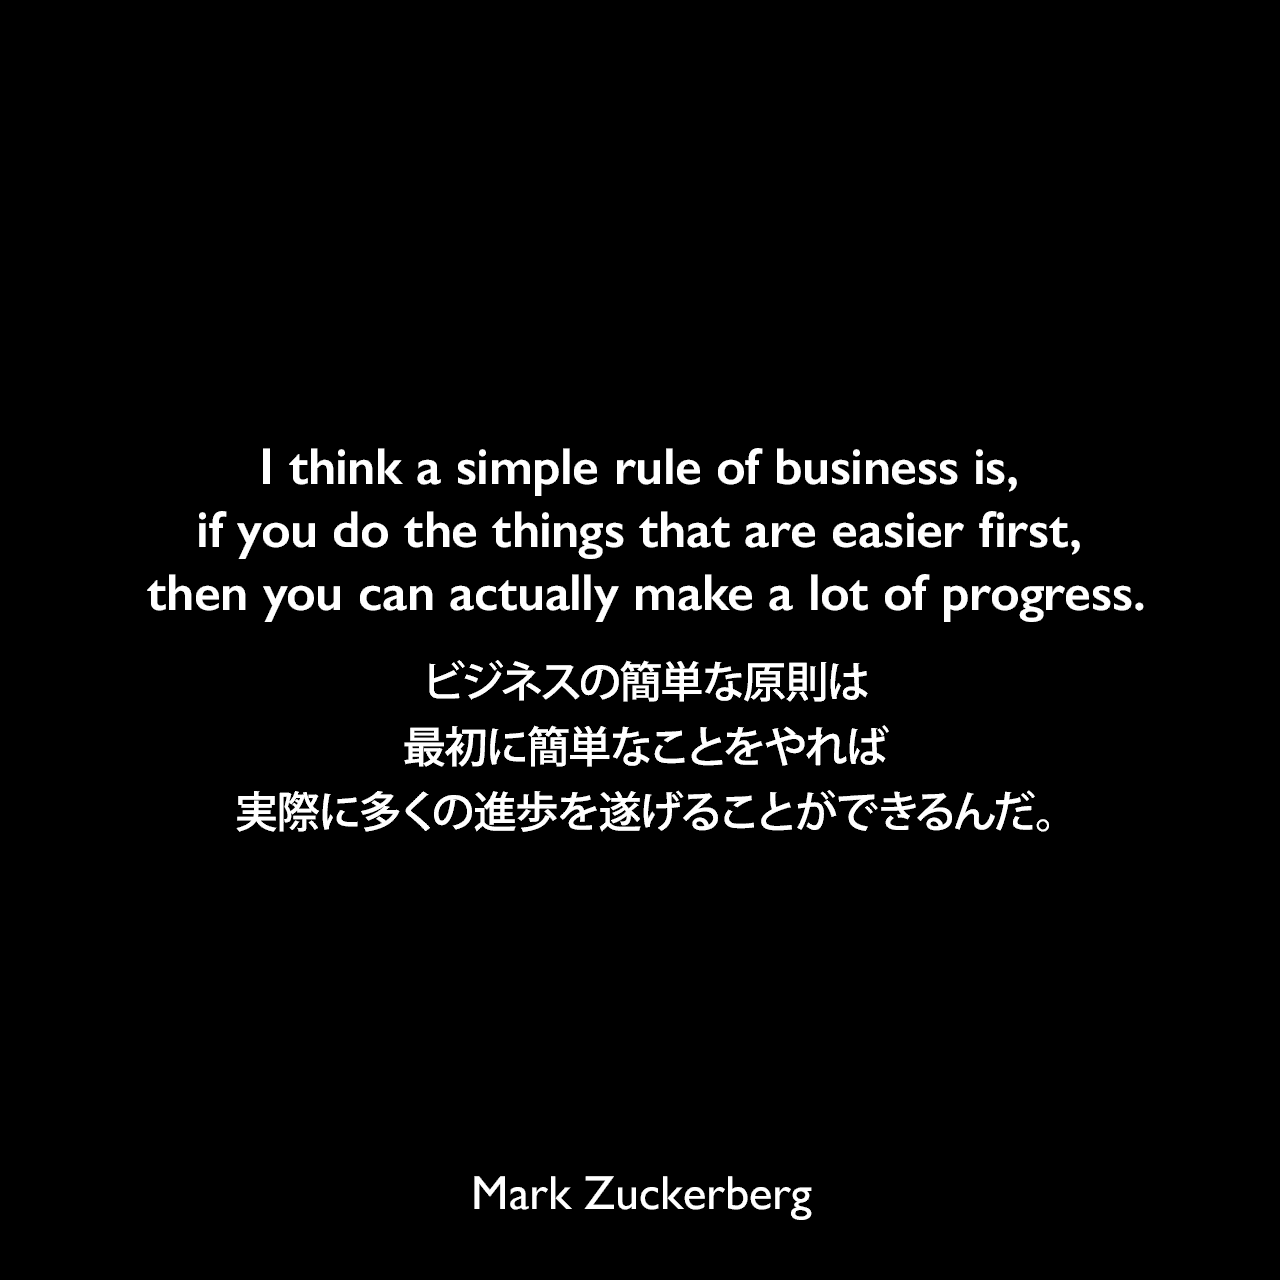 I think a simple rule of business is, if you do the things that are easier first, then you can actually make a lot of progress.ビジネスの簡単な原則は、最初に簡単なことをやれば、実際に多くの進歩を遂げることができるんだ。Mark Zuckerberg